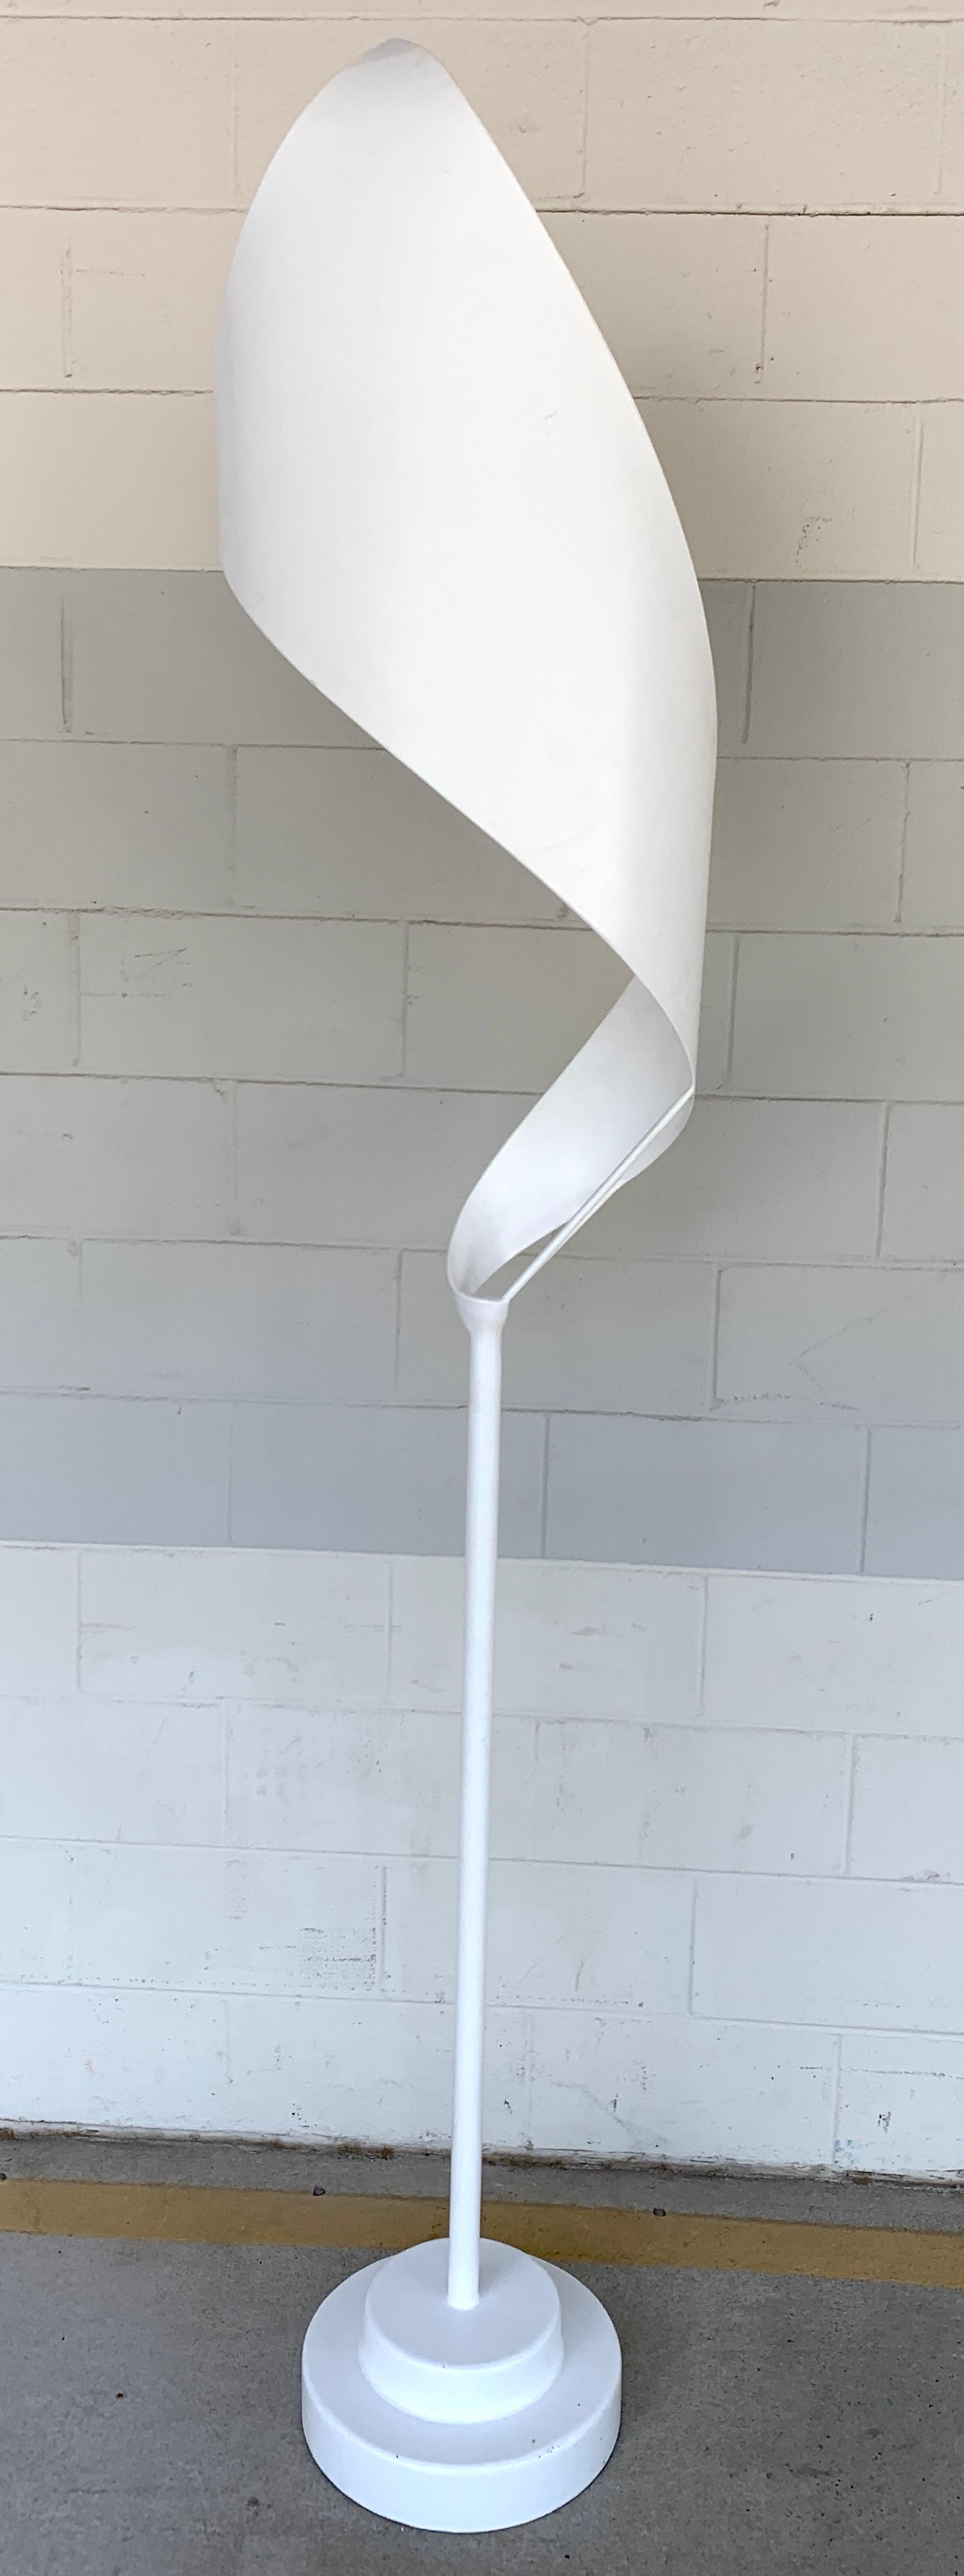 Large modern white enameled forged steel Kinetic sculpture, visually Kinetic, non moveable sculpture, standing seven feet-eight inches high, with a 13-inch diameter base. Beautifully forged tapering 3